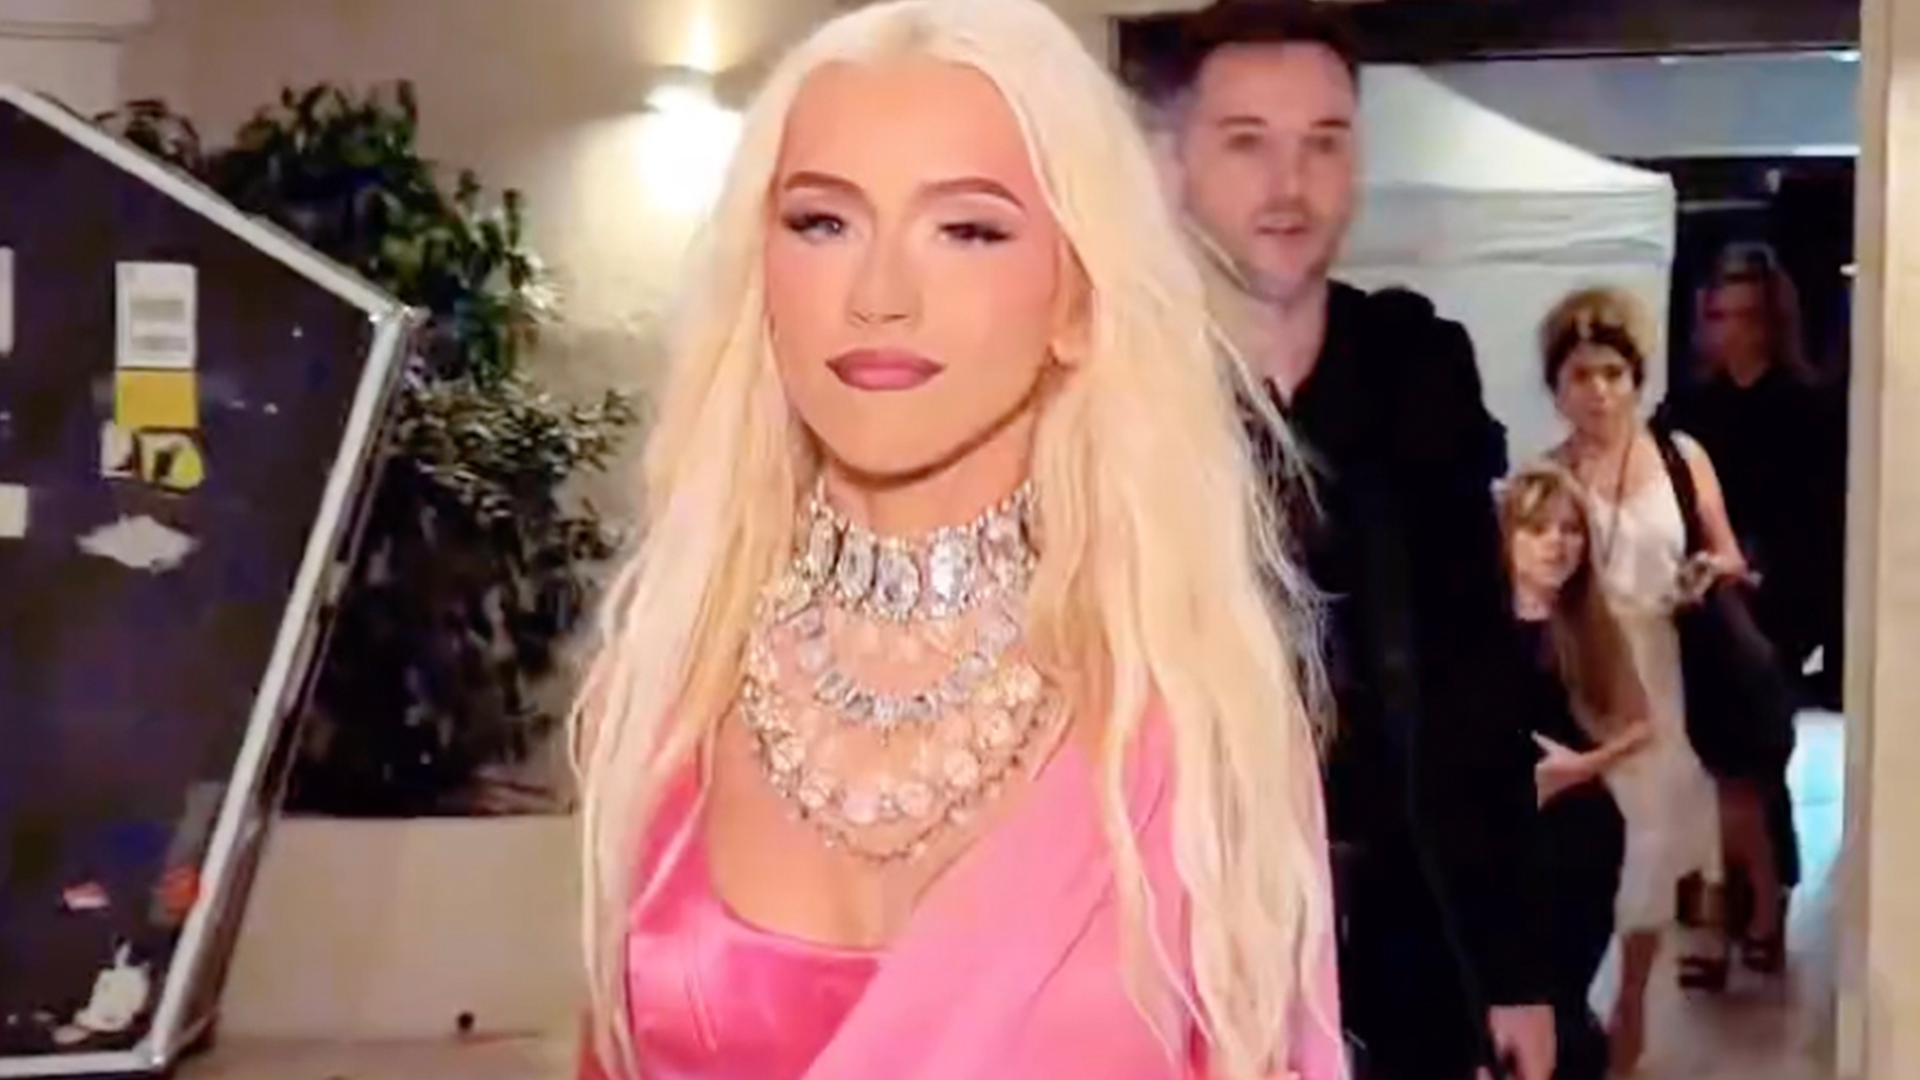 Christina Aguilera looks slimmer-than-ever in short pink dress for Dolce & Gabbana event after star’s major weight loss [Video]